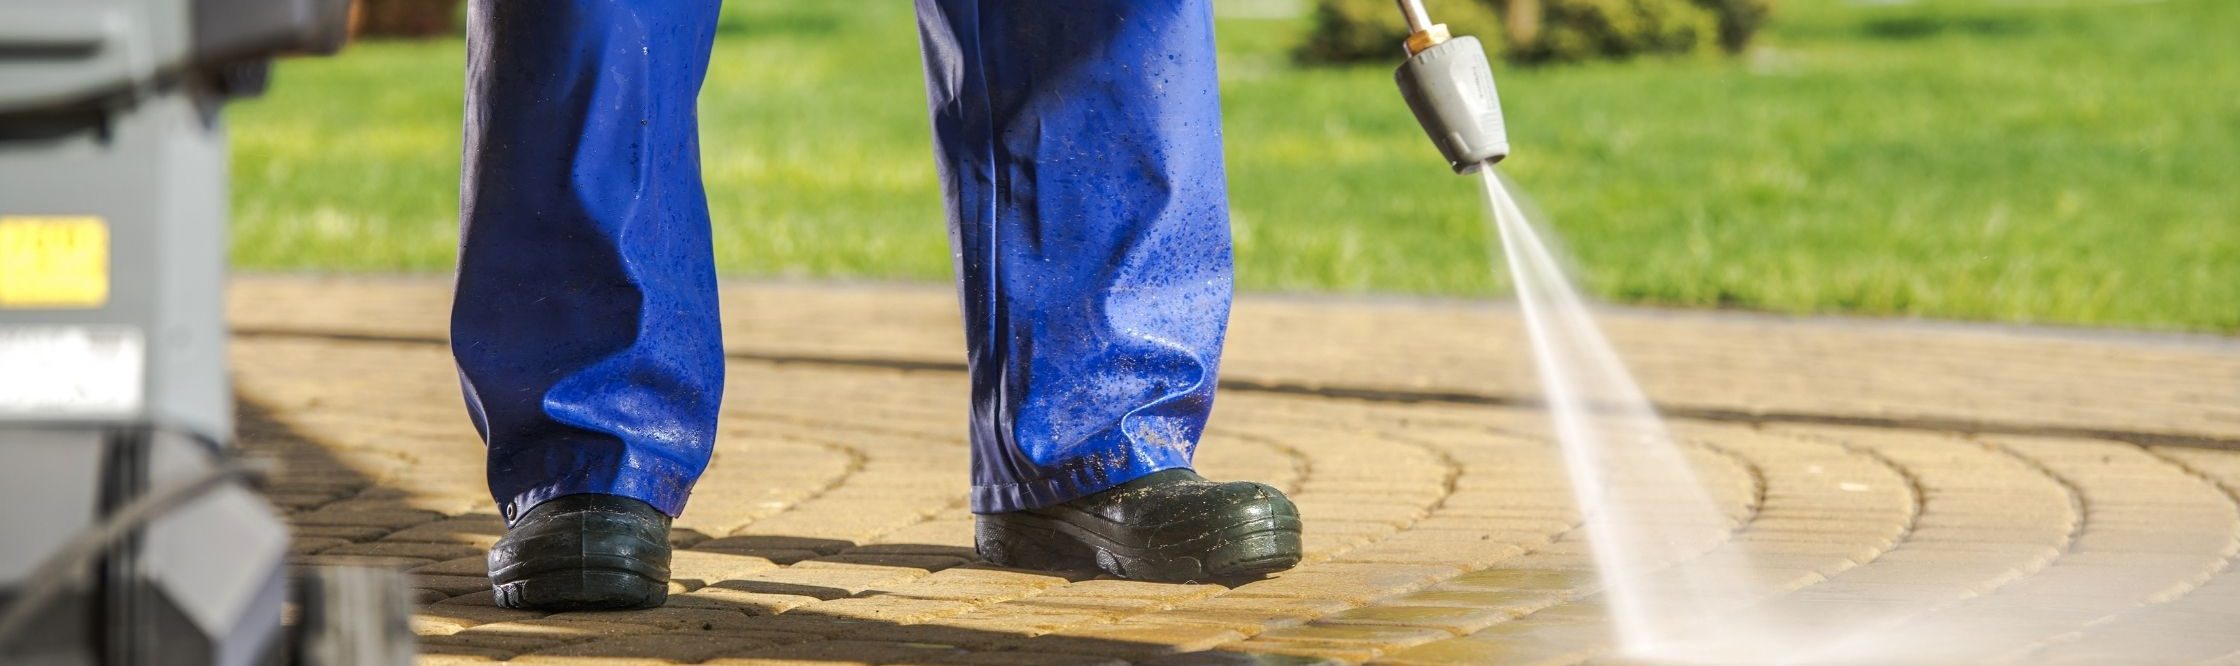 Pressure Washing services Dundee FL